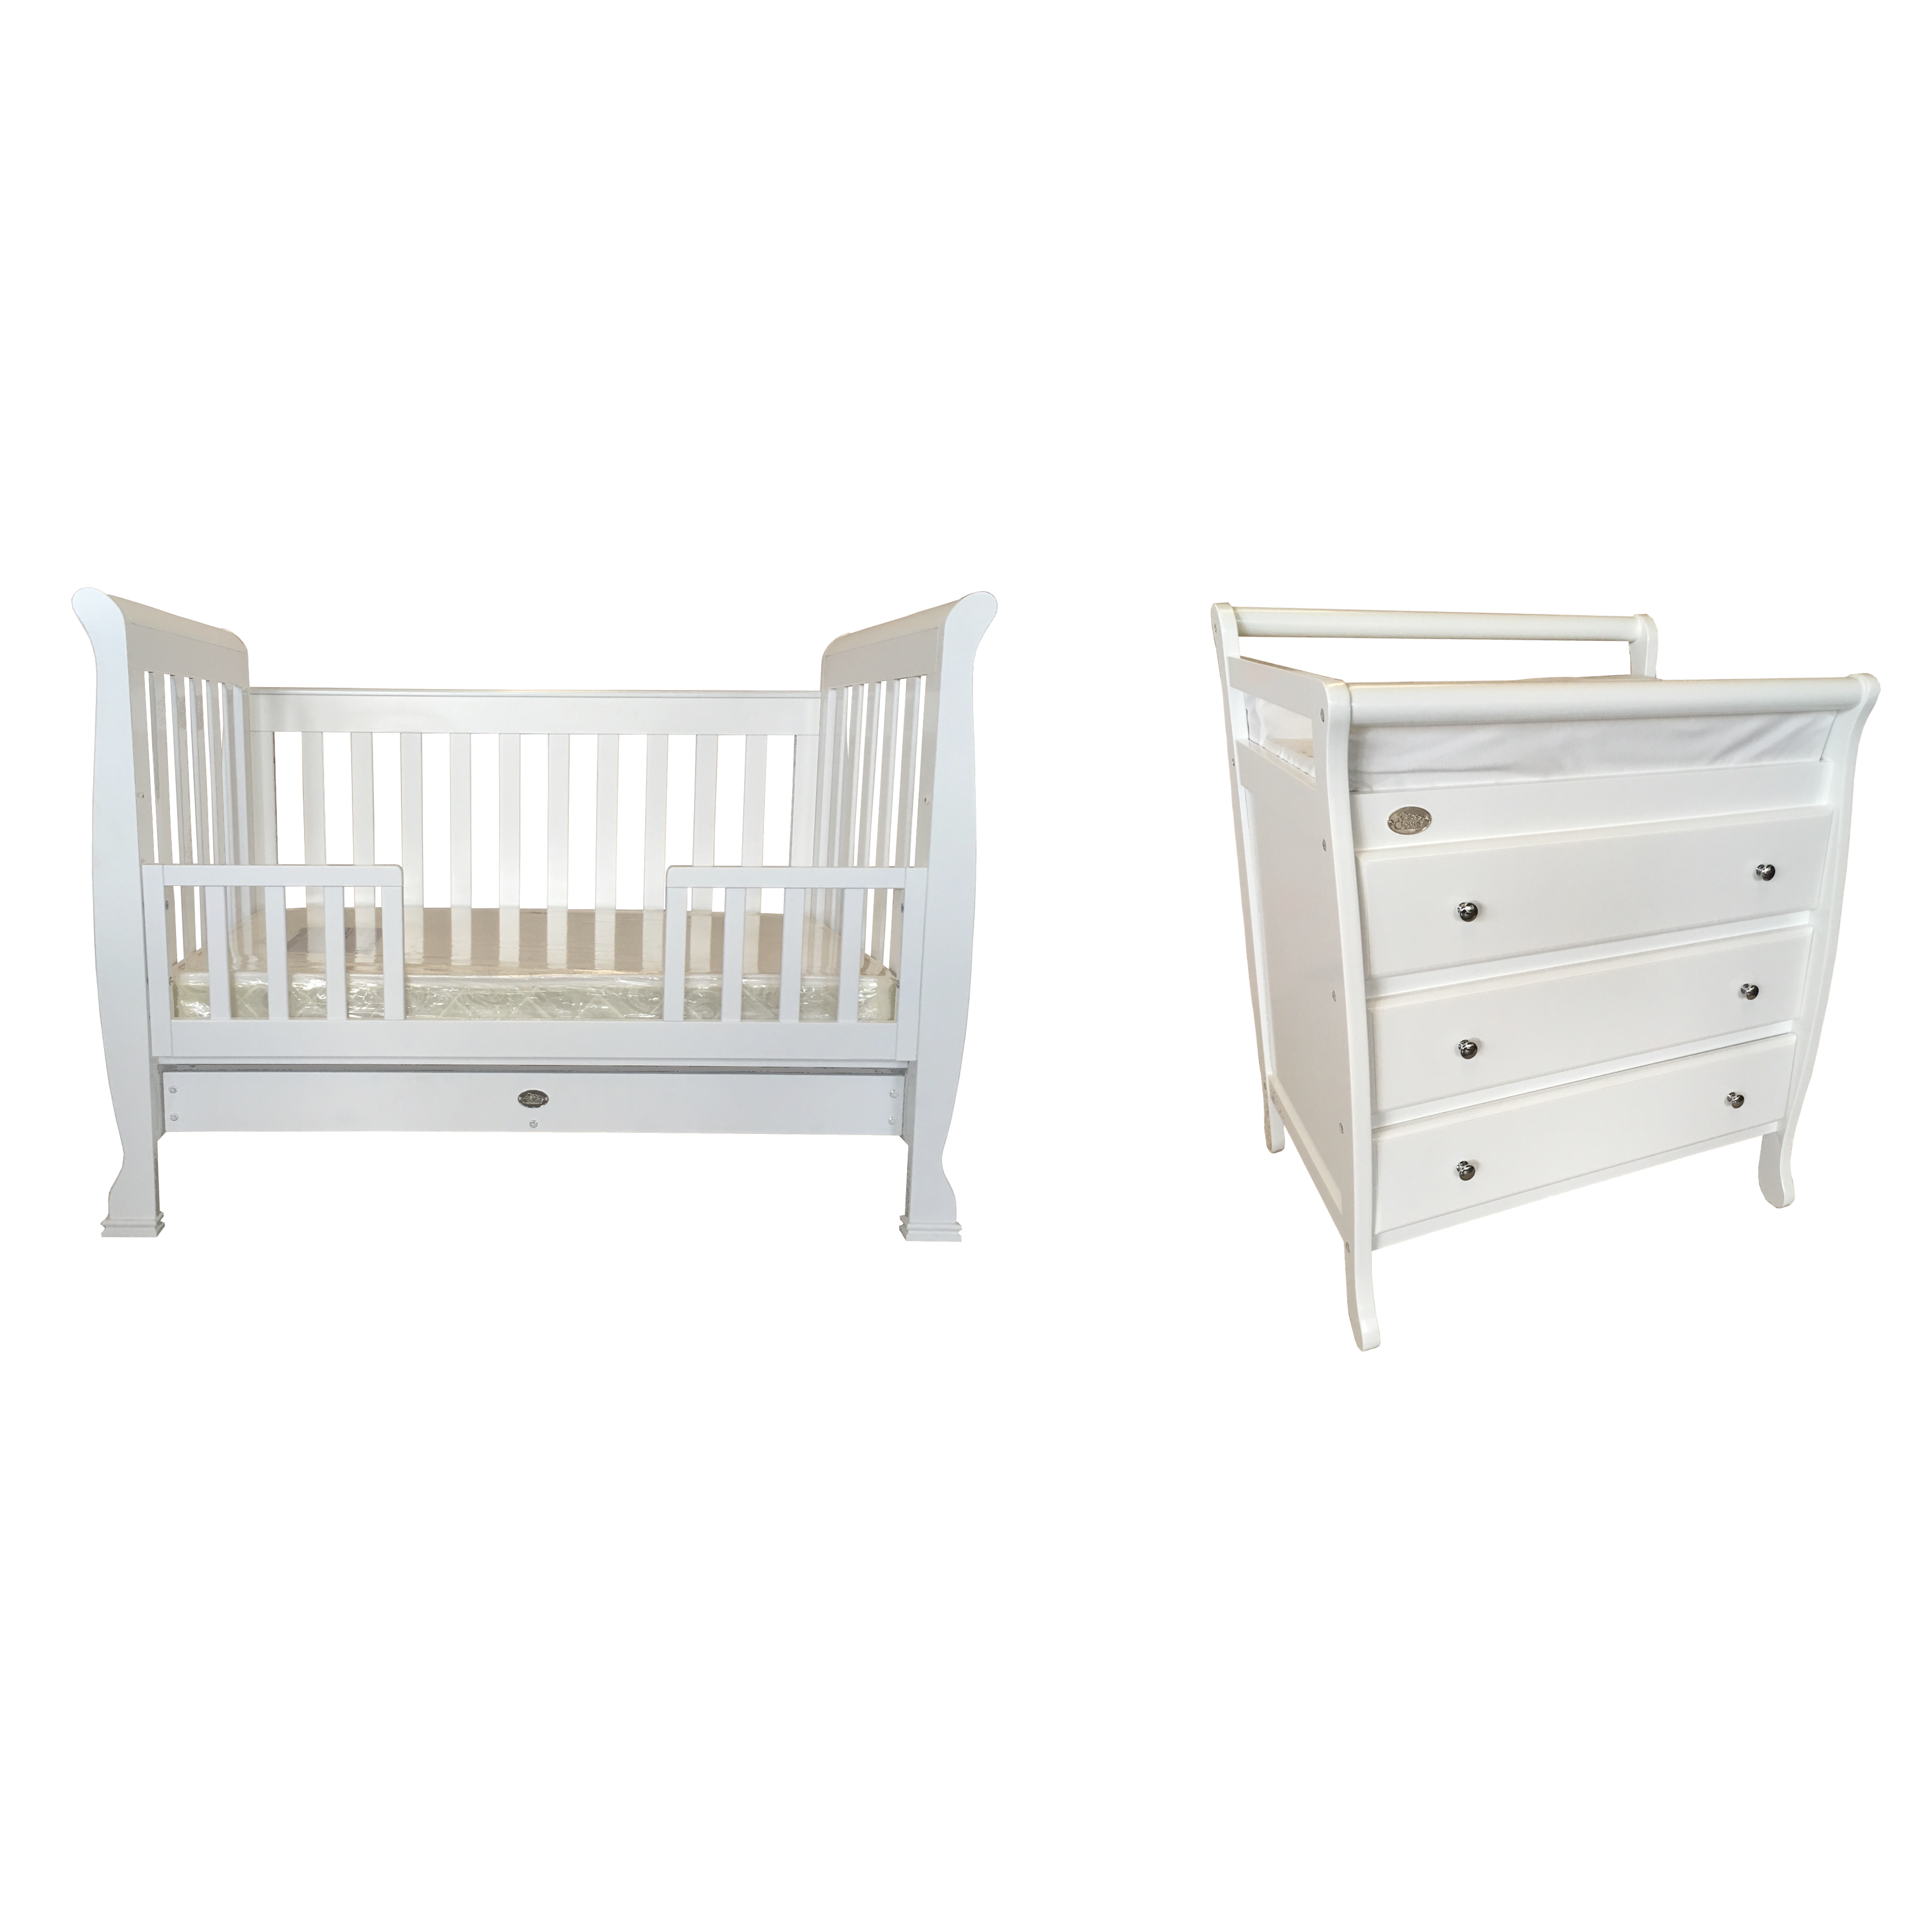 4PC Nursery Set with 3 Drawer Changing Table Showing Toddler Rail